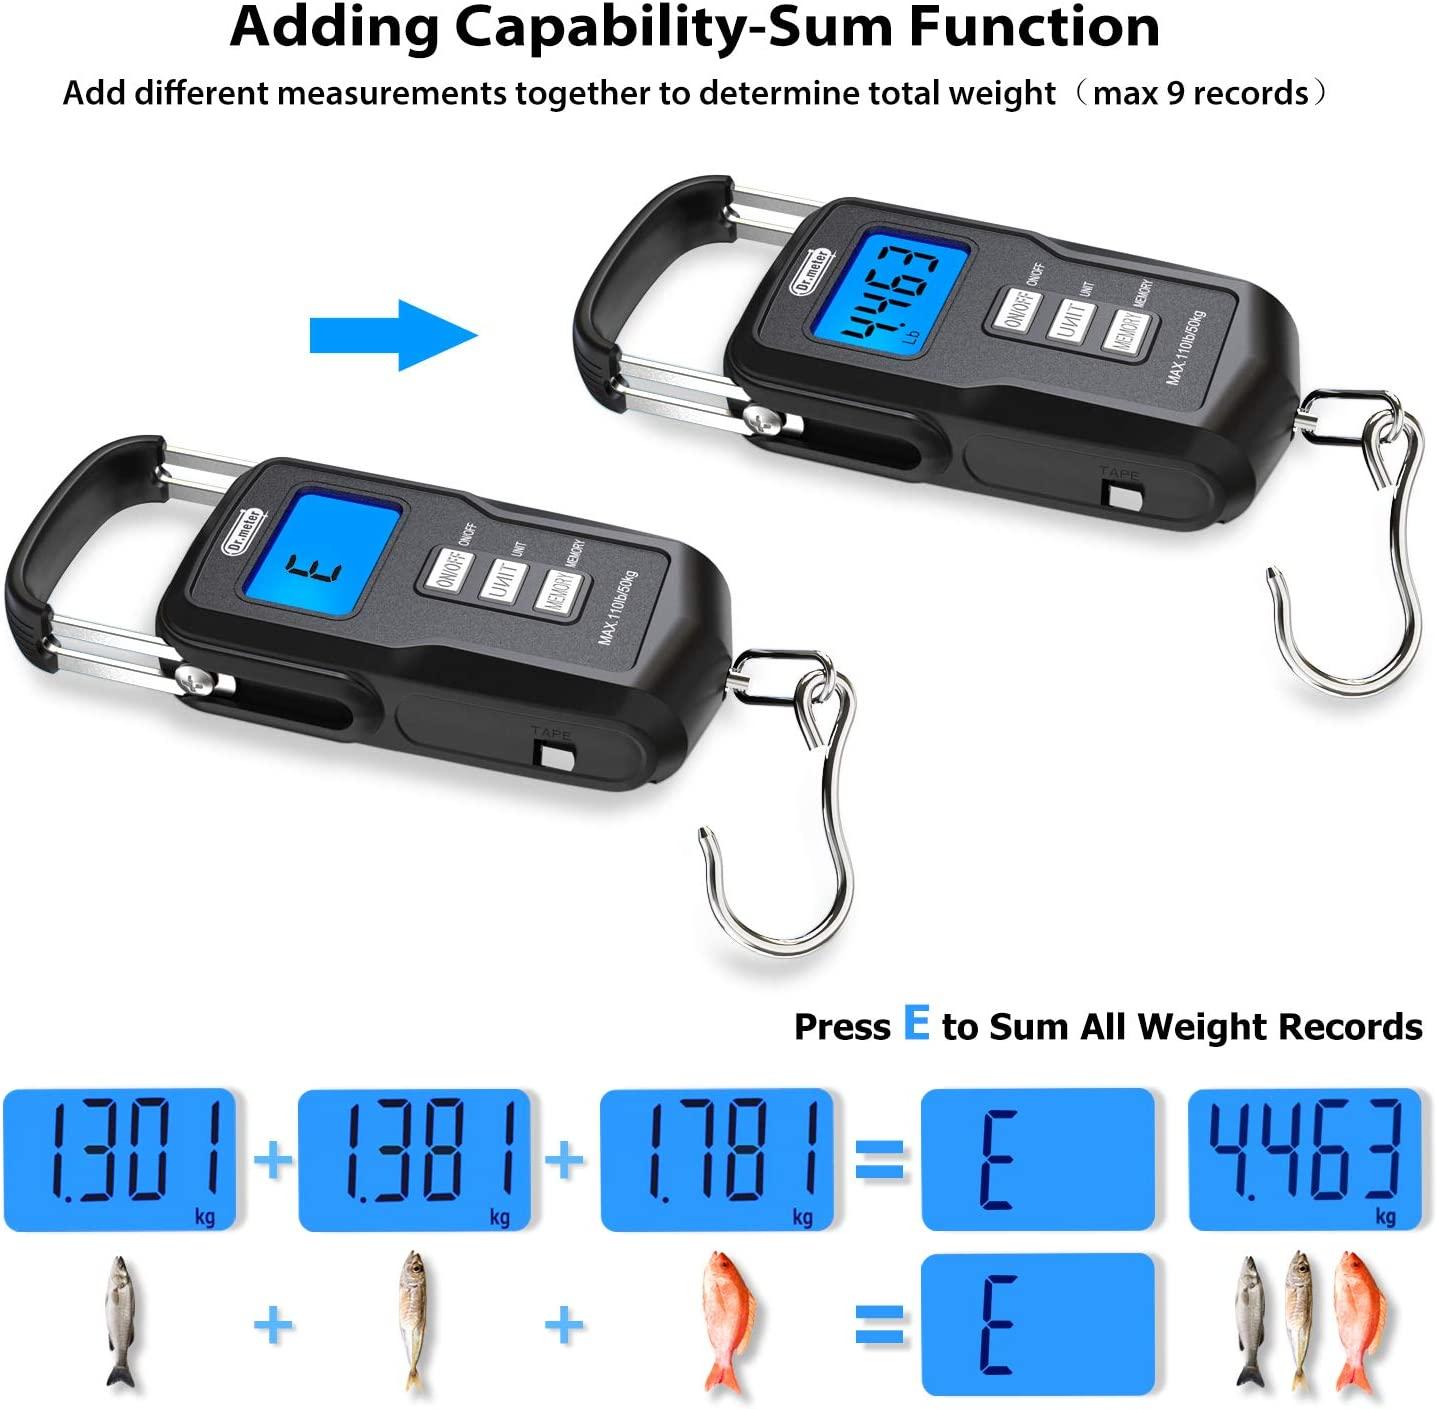 UpgradedFS01 Fishing Scale, Dr.meter 110lb/50kg Digital Hanging Scale with  Storage Function and Numerical Comparison, Backlit LCD Display, Measuring  Tape and 2 AAA Batteries Included